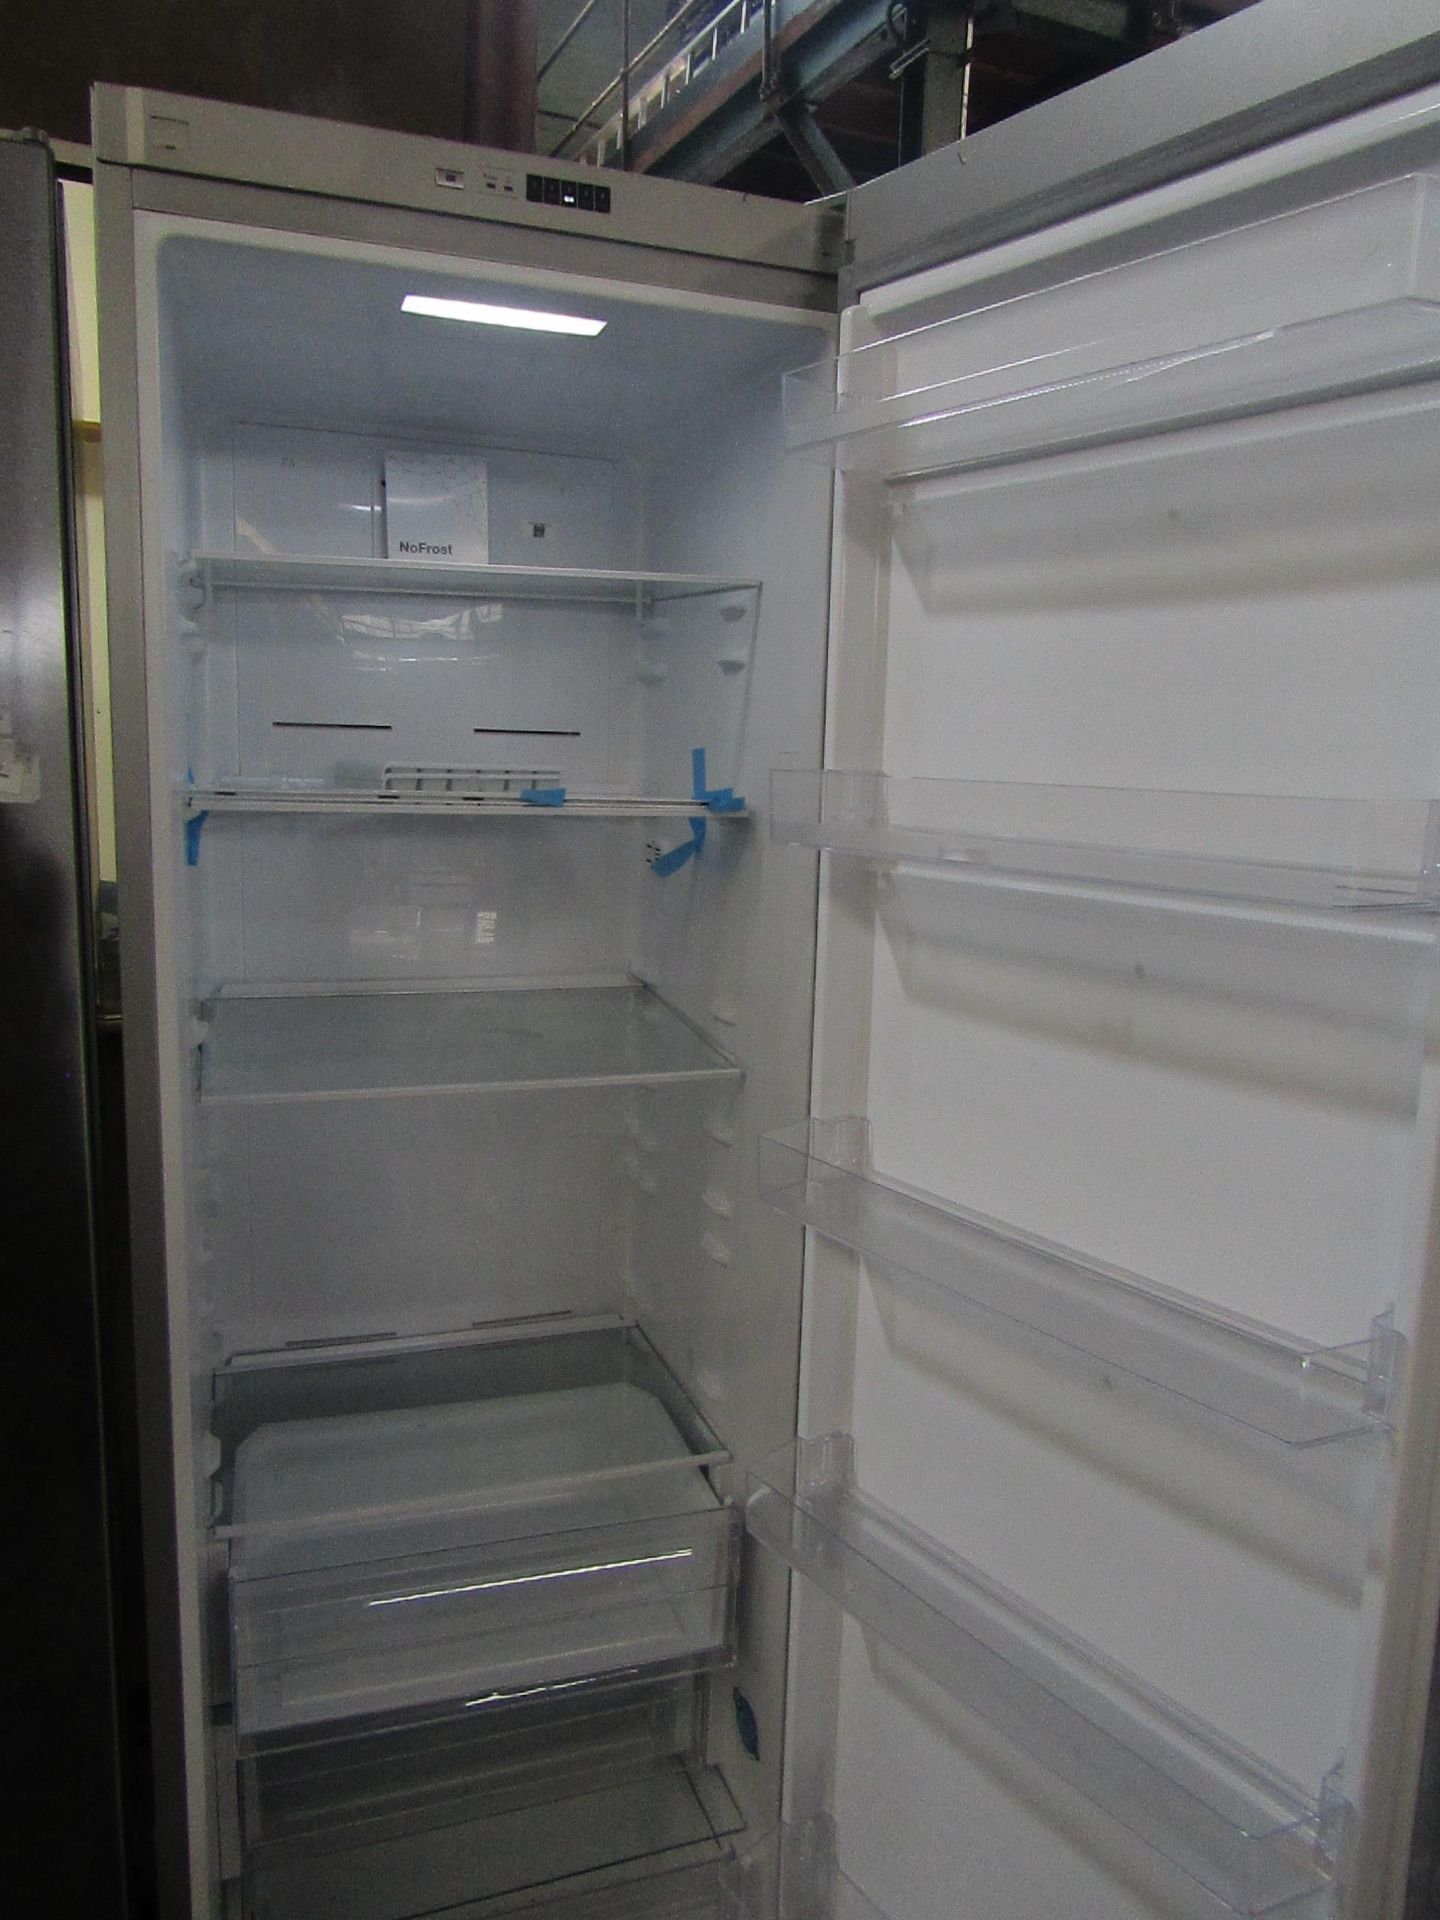 Smeg - Freestanding Fridge - Clean On Inside - Powers On & Cold Tested Working. - Image 2 of 2